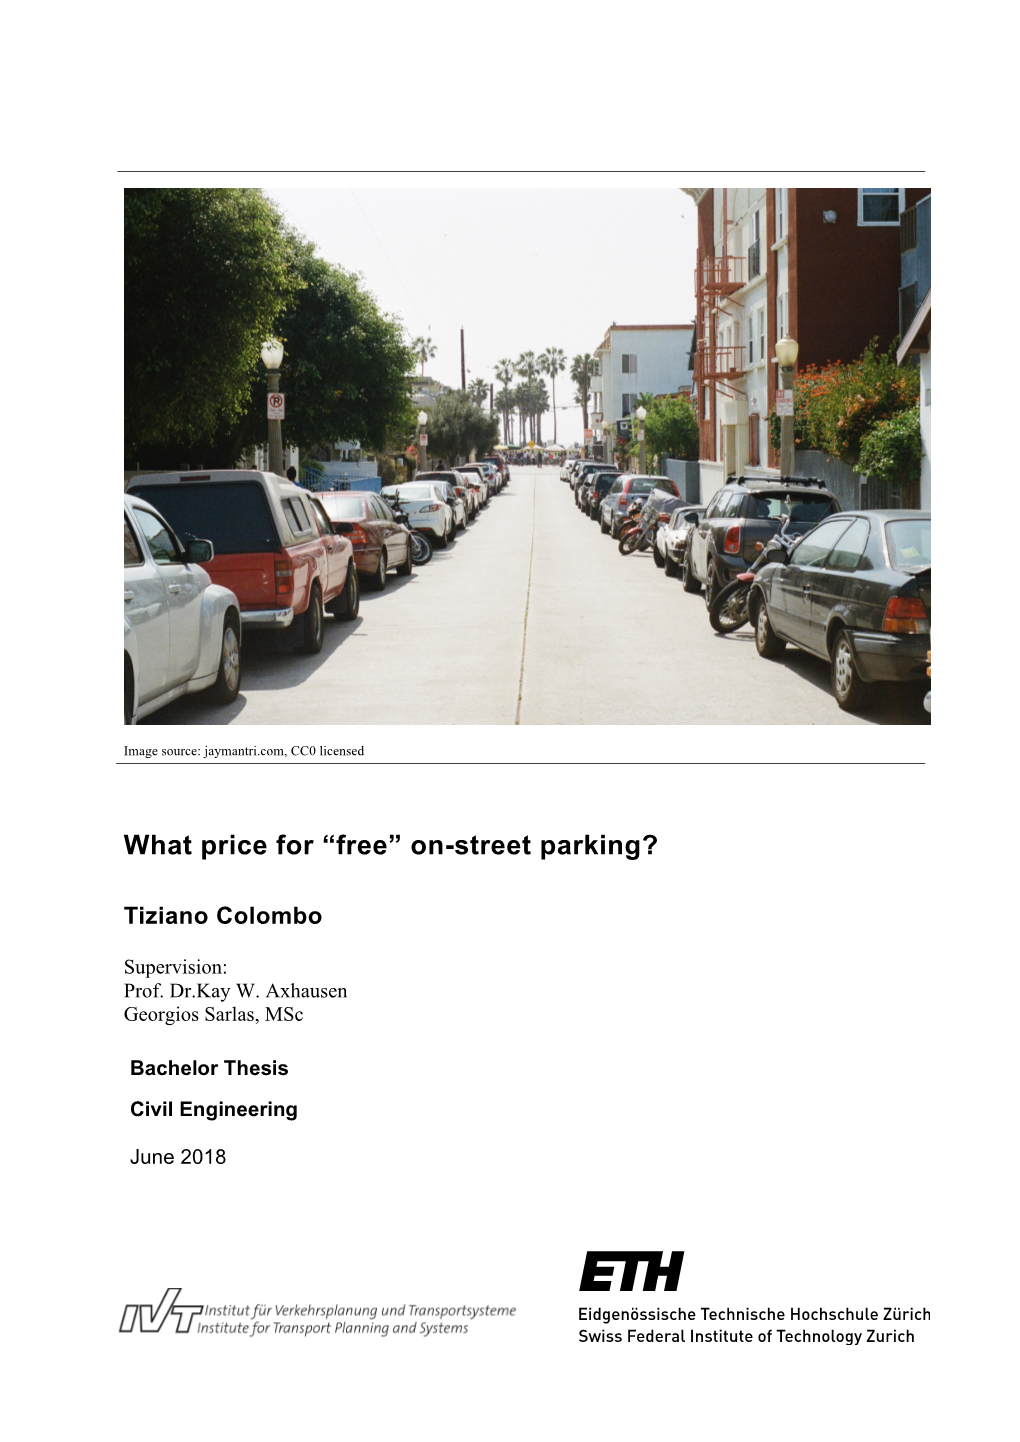 What Price for “Free” On-Street Parking?